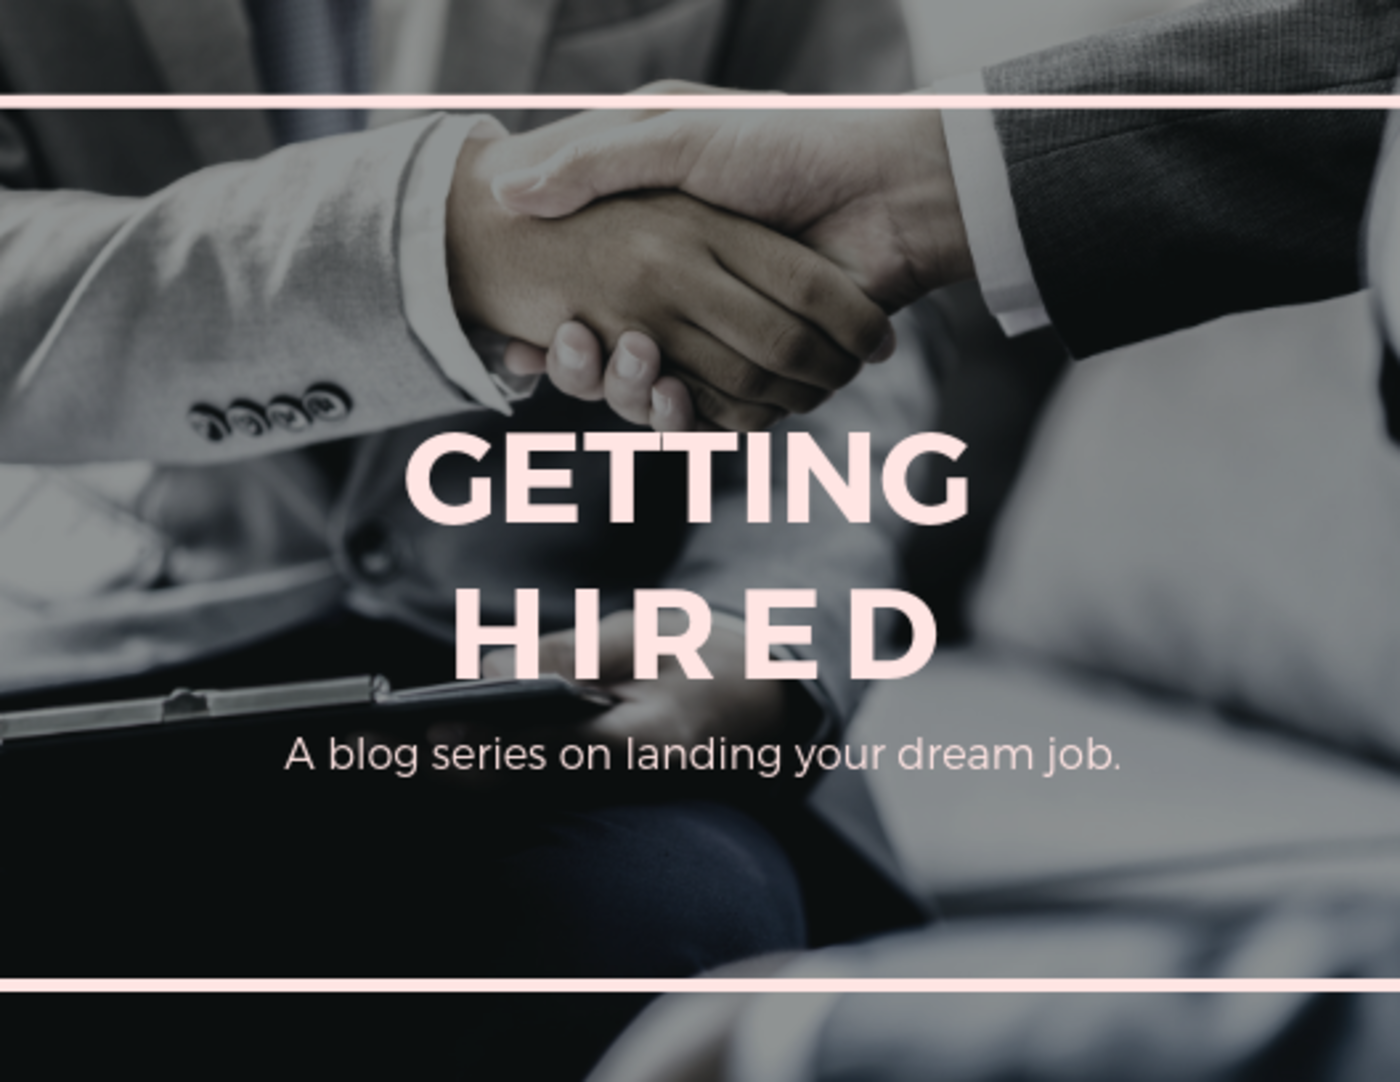 Getting Hired: Disclosing a Service-Connected Disability